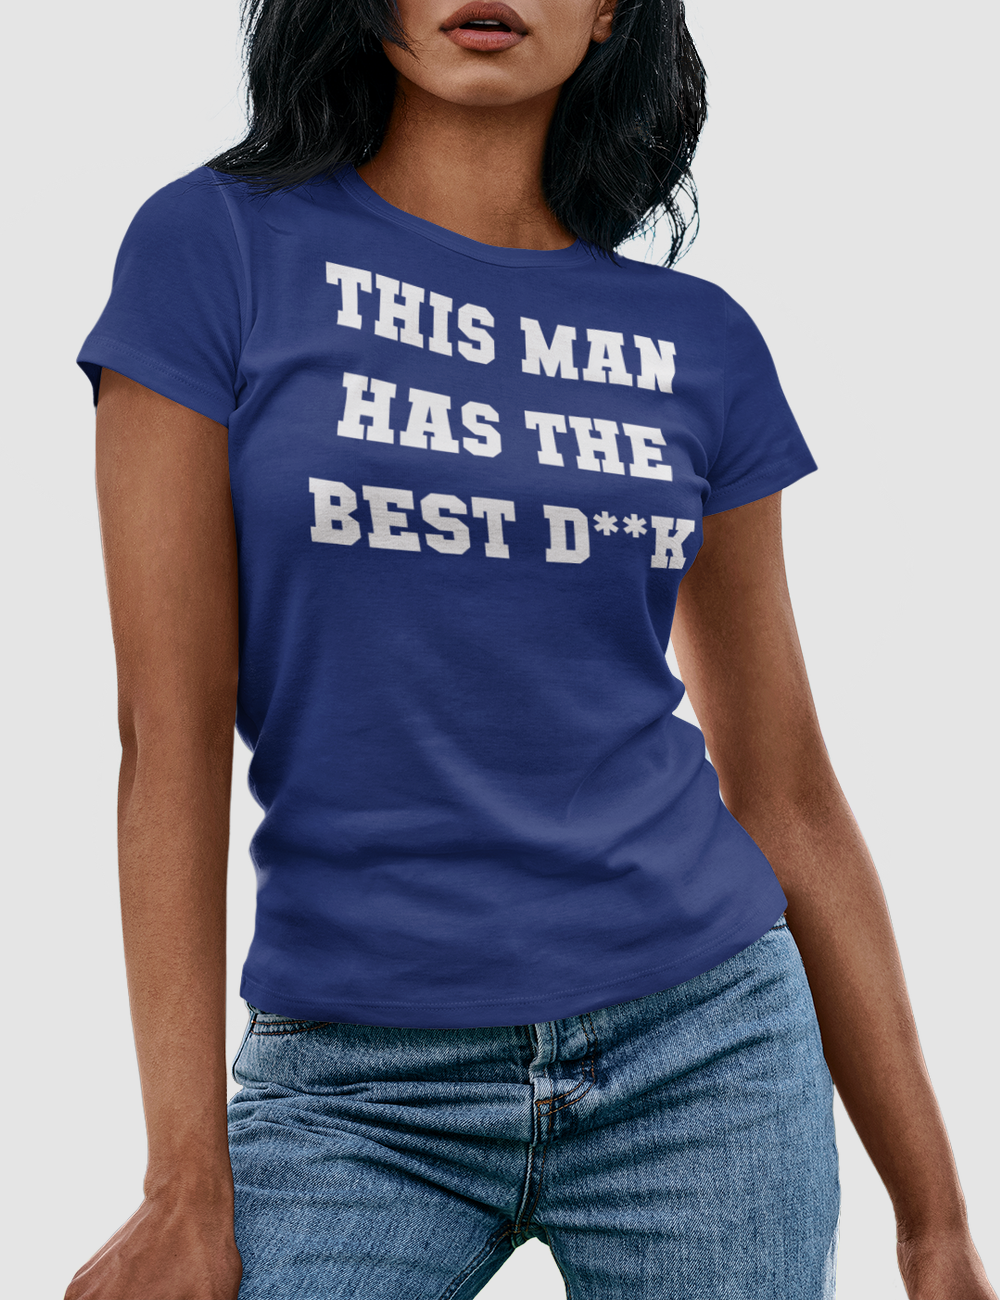 This Man Has The Best D**K | Women's Fitted T-Shirt OniTakai